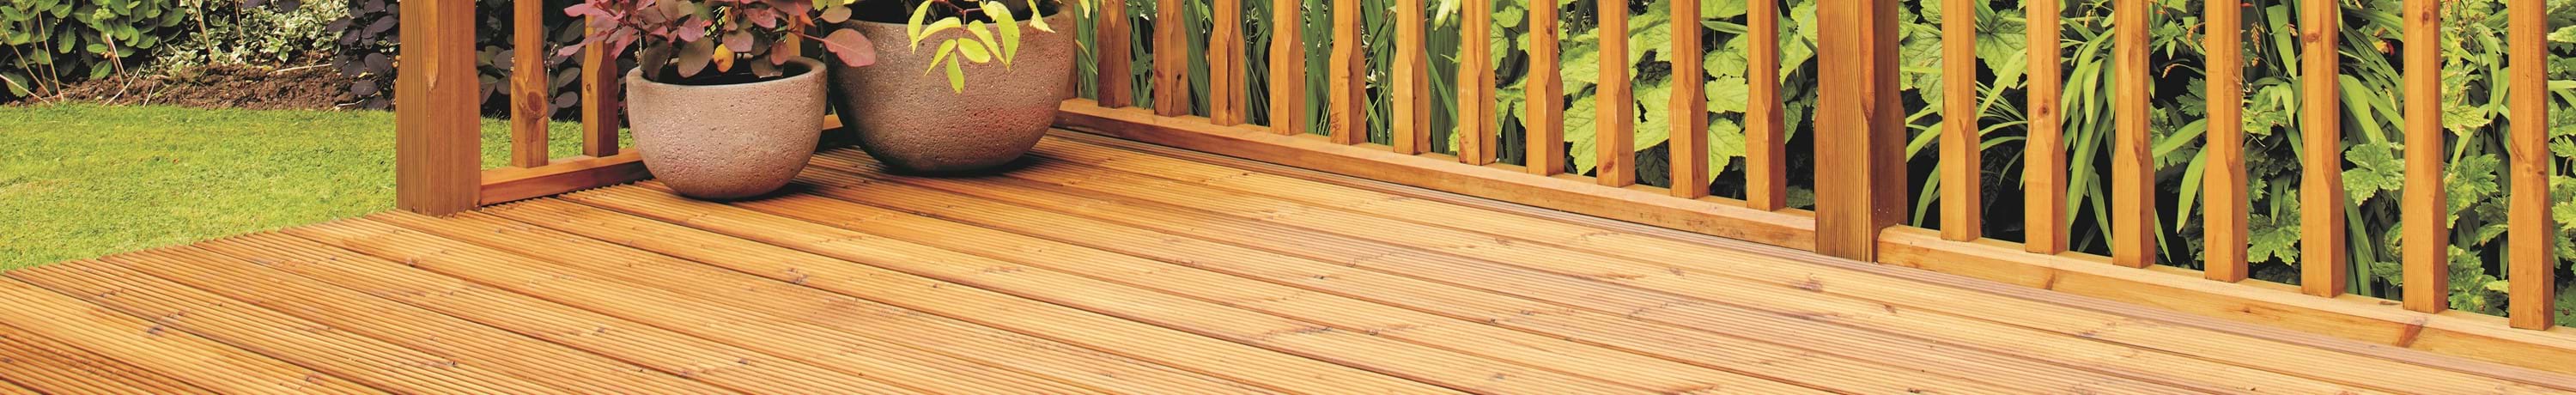 decking stain category.jpg